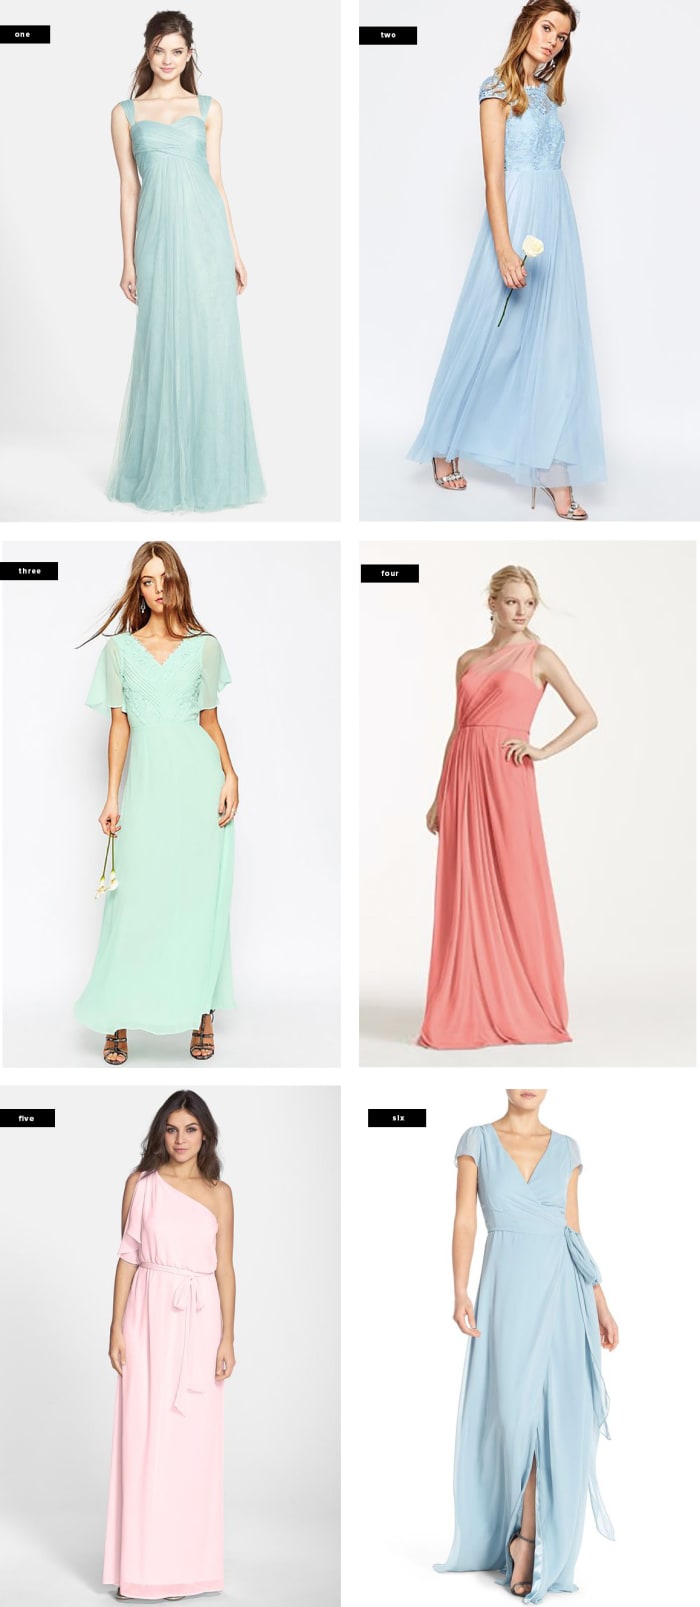 How to Pull Off Mismatched Bridesmaid Dresses for a Beautiful Bridal ...